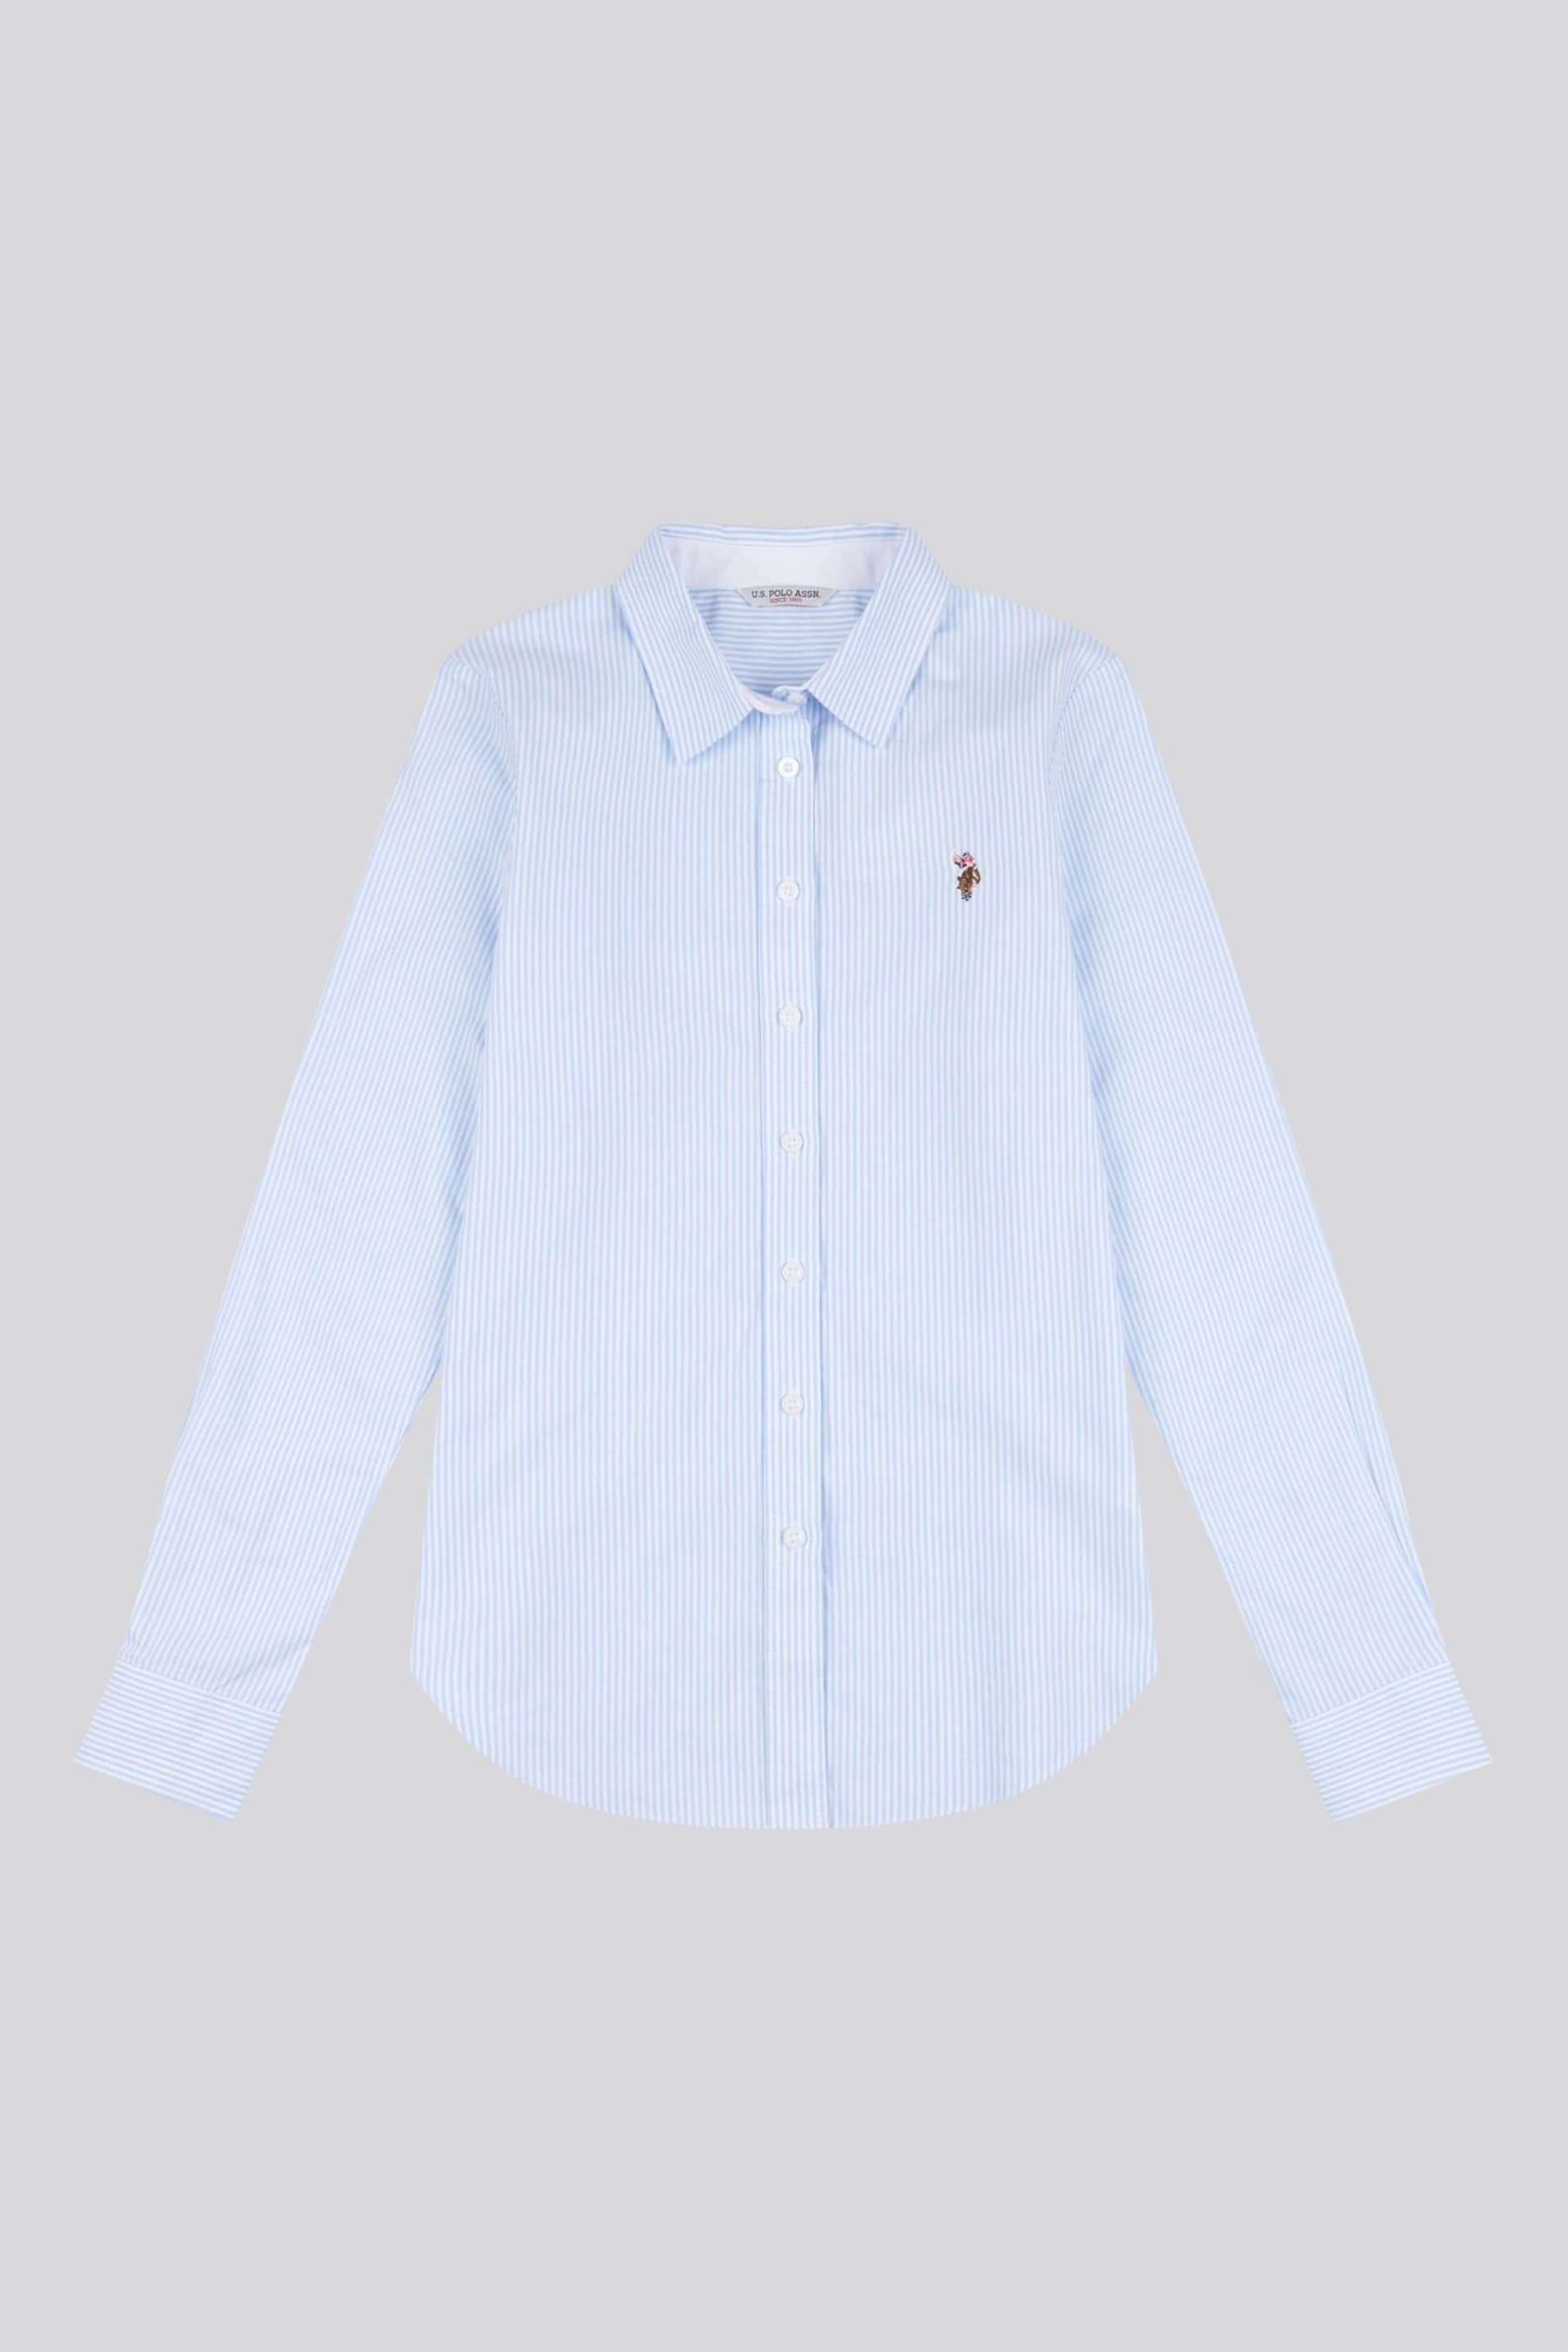 U.S. Polo Assn. Womens Classic Fit Blue Stripe Oxford Shirt - Image 7 of 8